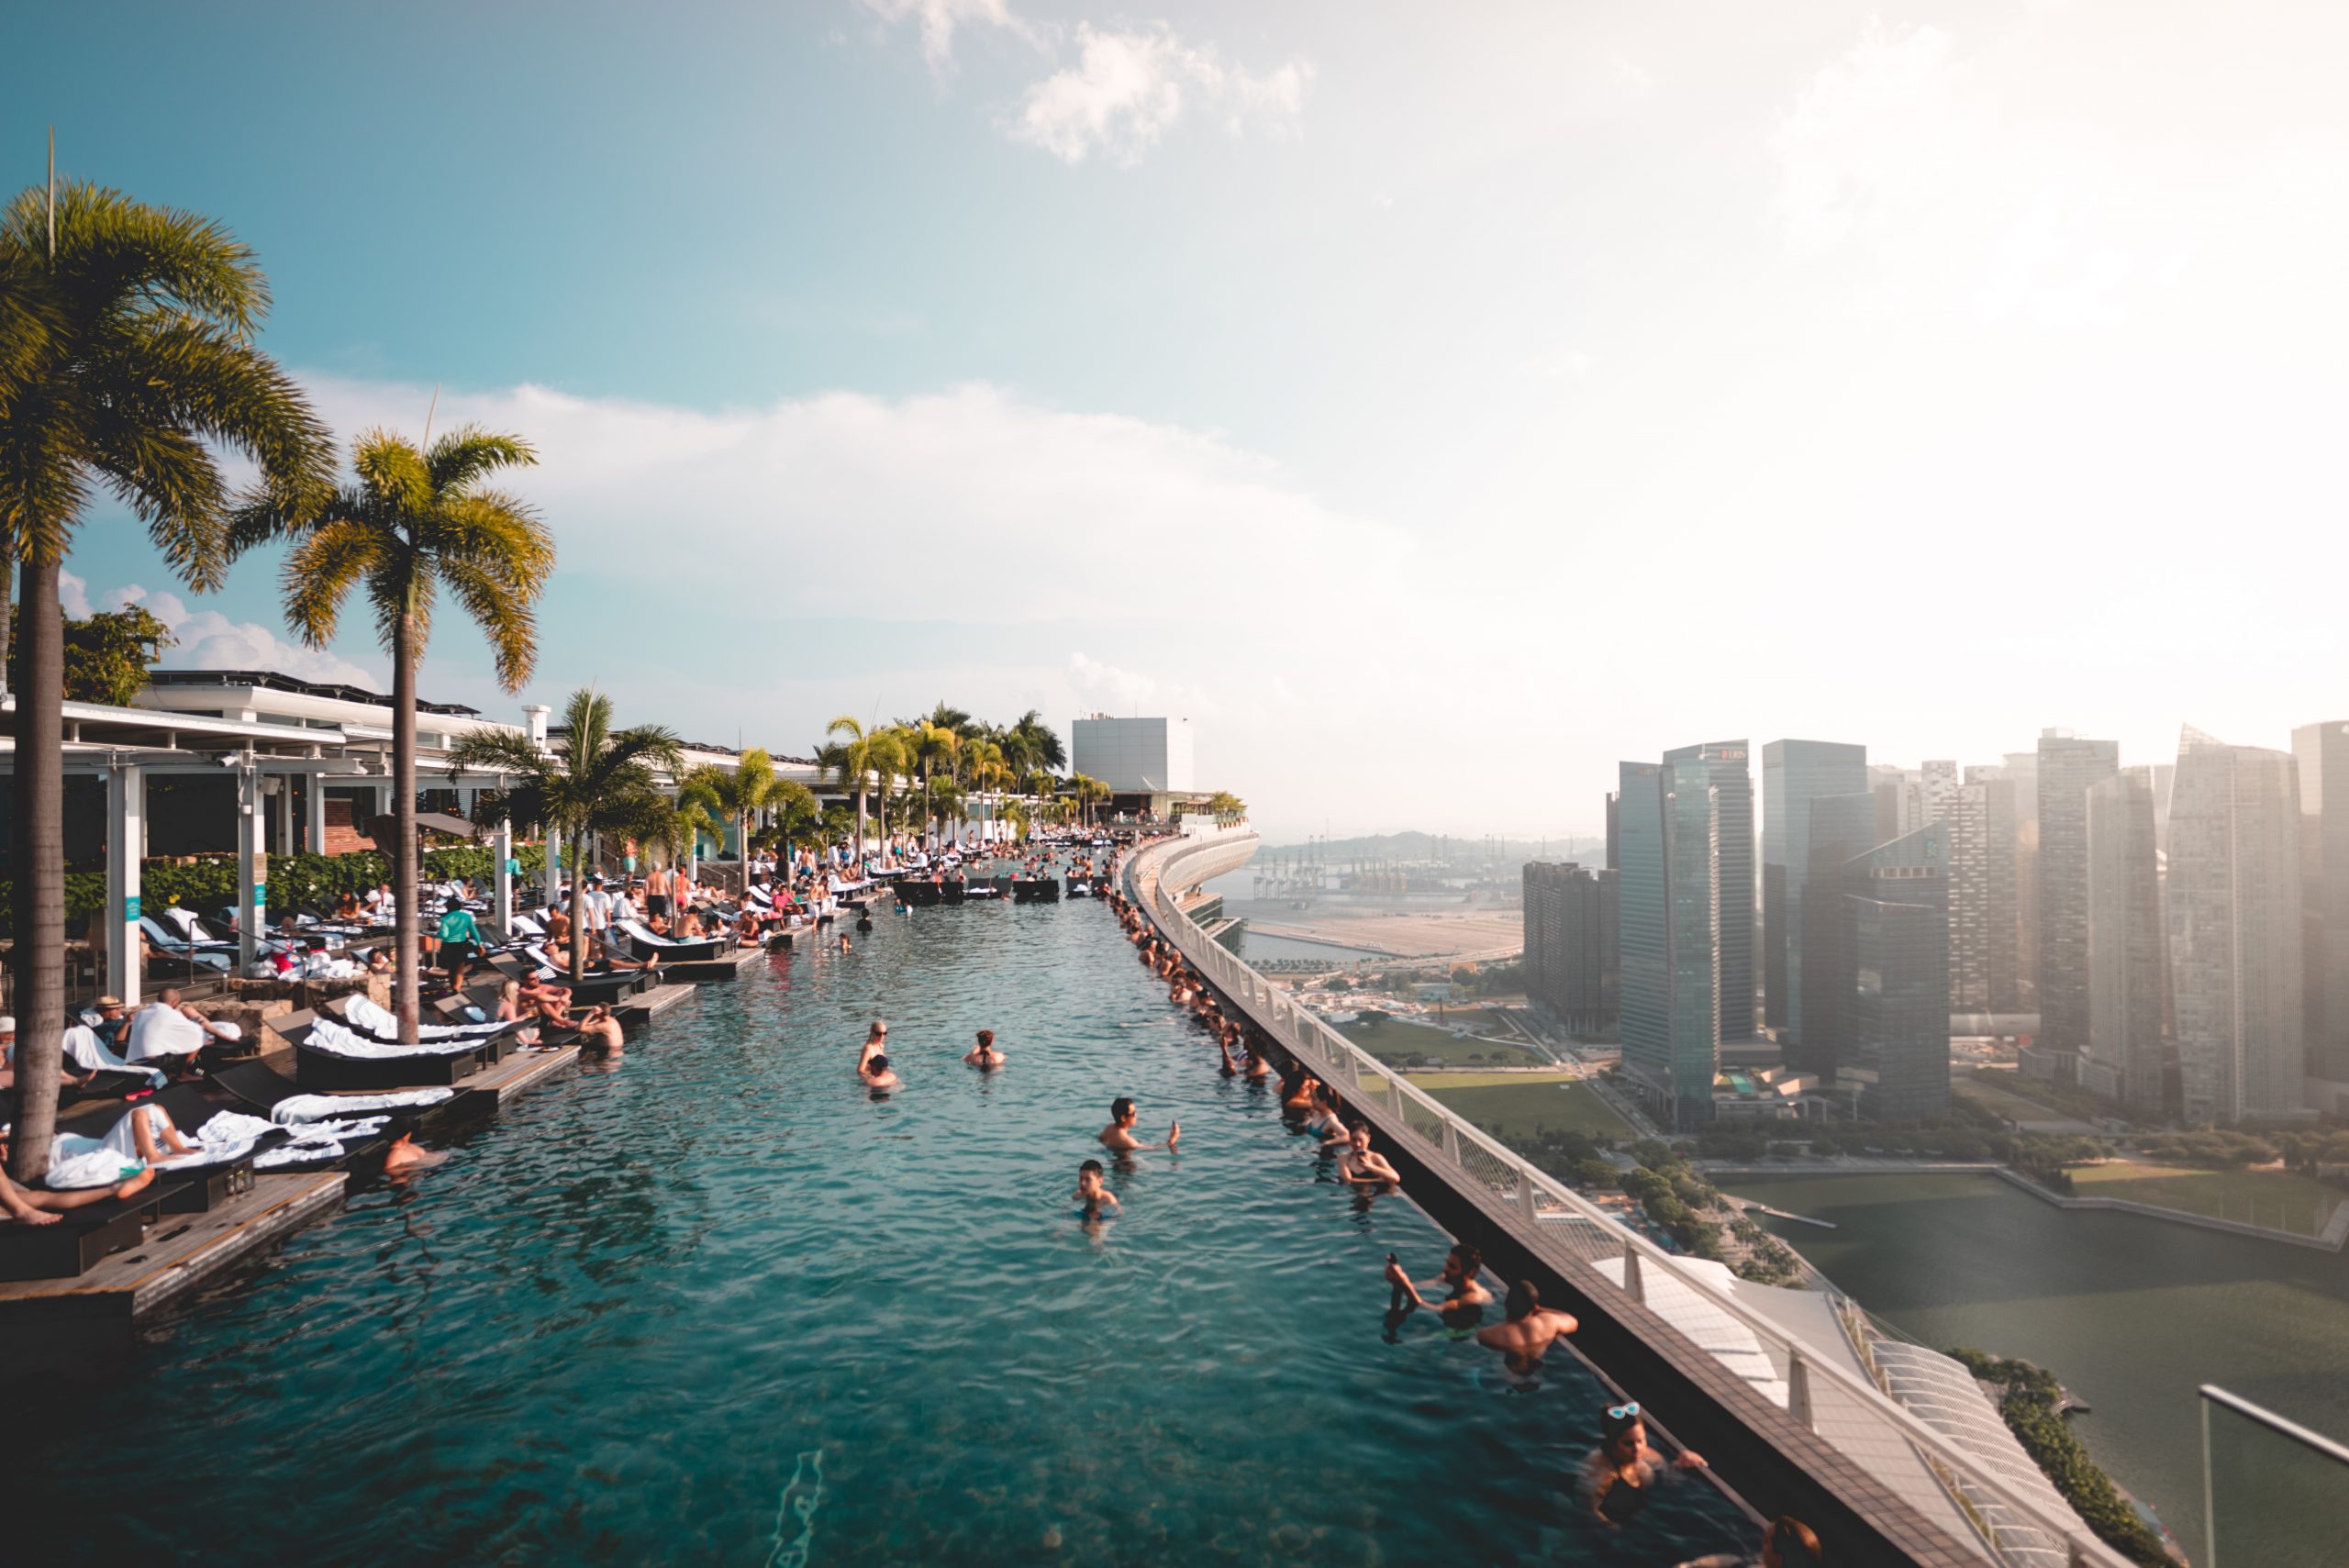 Marina Bay Sands Hotel - 10 Reasons To Visit Singapore in 2023